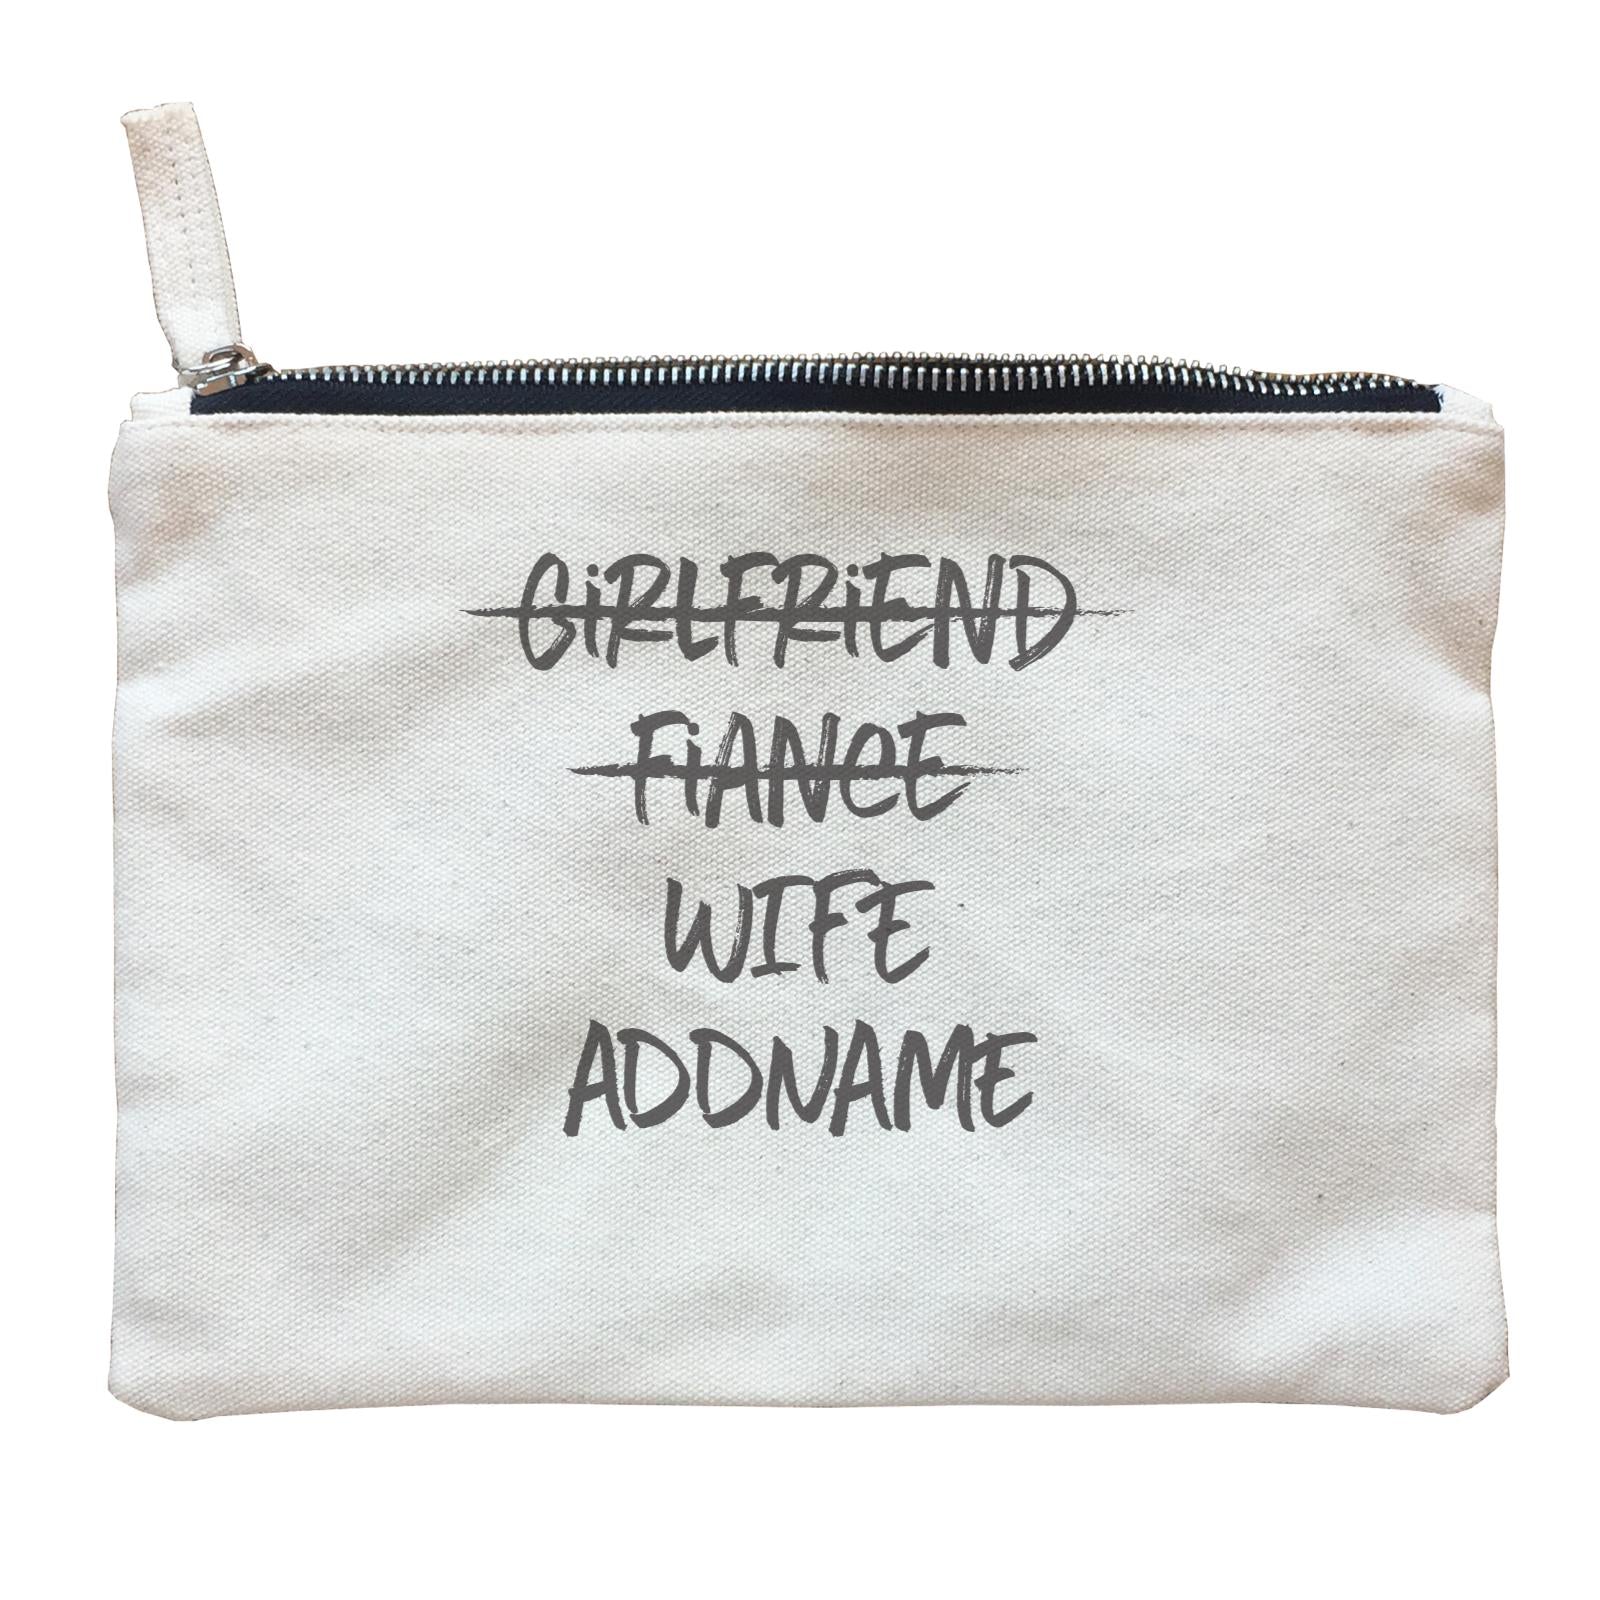 Husband and Wife Girlfriend Fiance Wife Addname Zipper Pouch